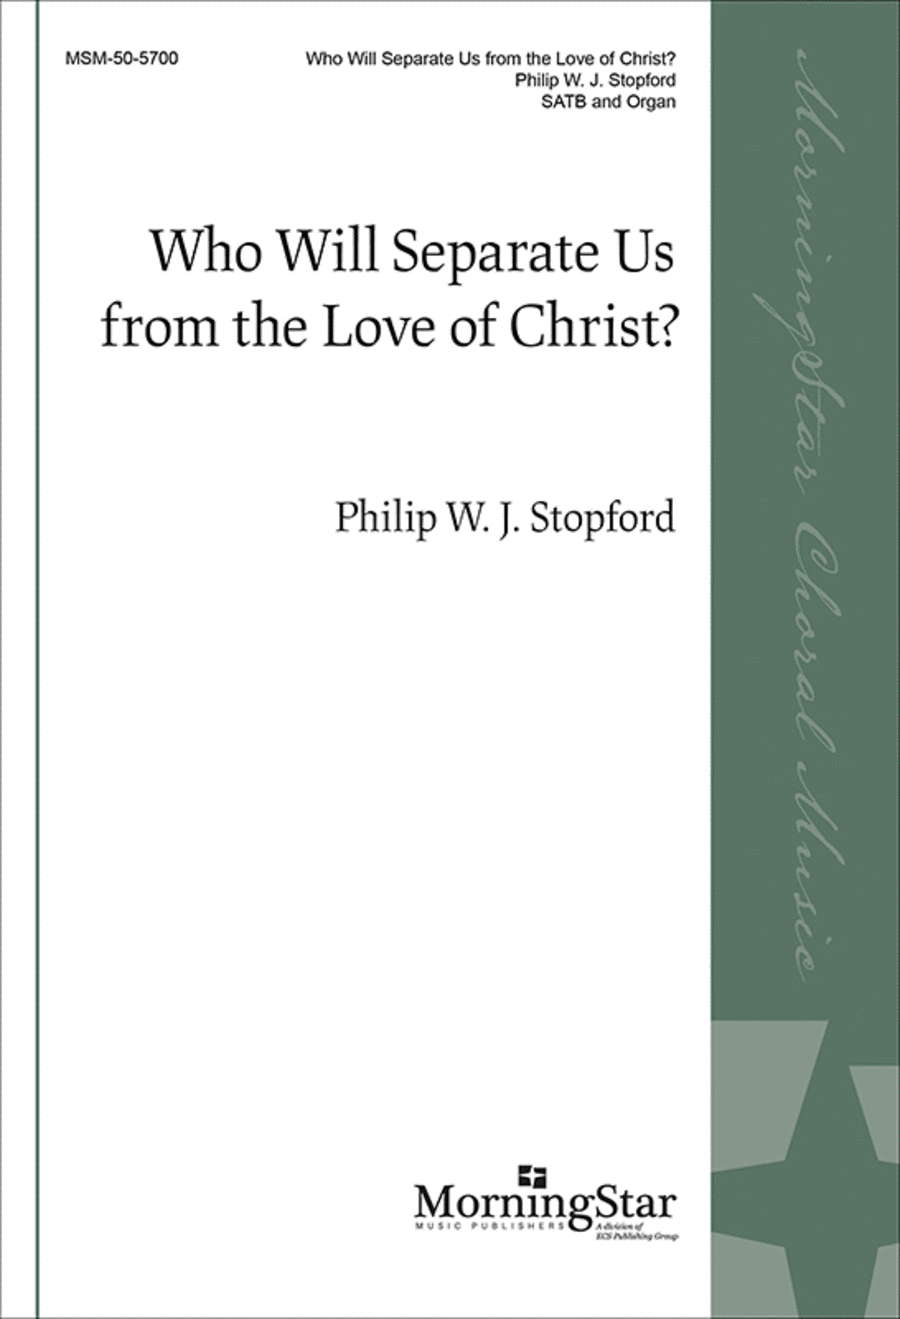 Who Will Separate Us from the Love of Christ?